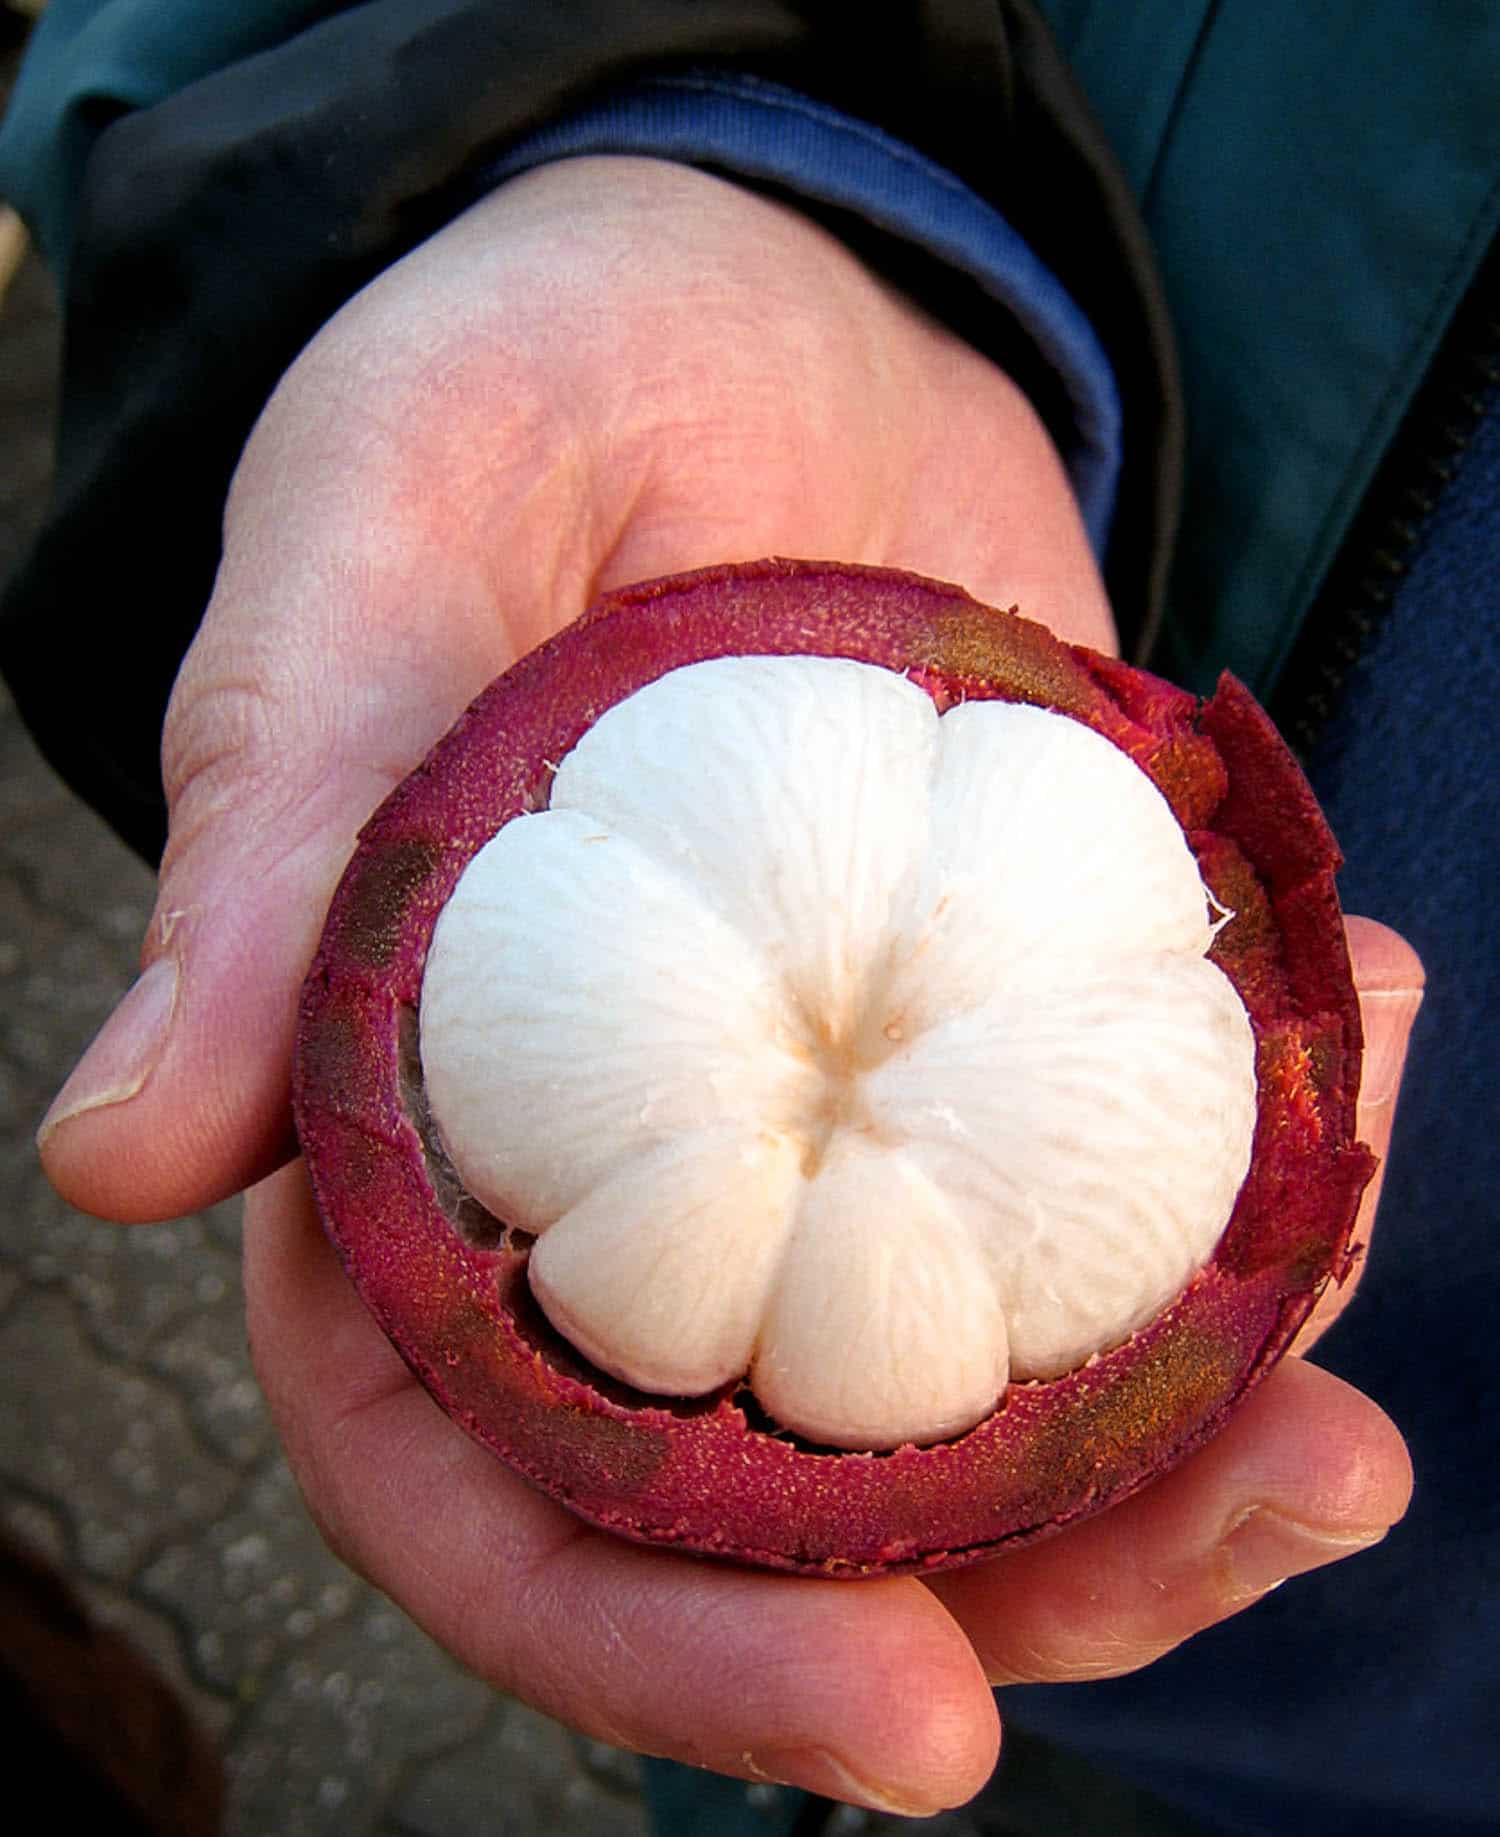 Mangosteen is one of the exotic fruits originally from Indonesia but can be found all over Asia and in some parts of South America.